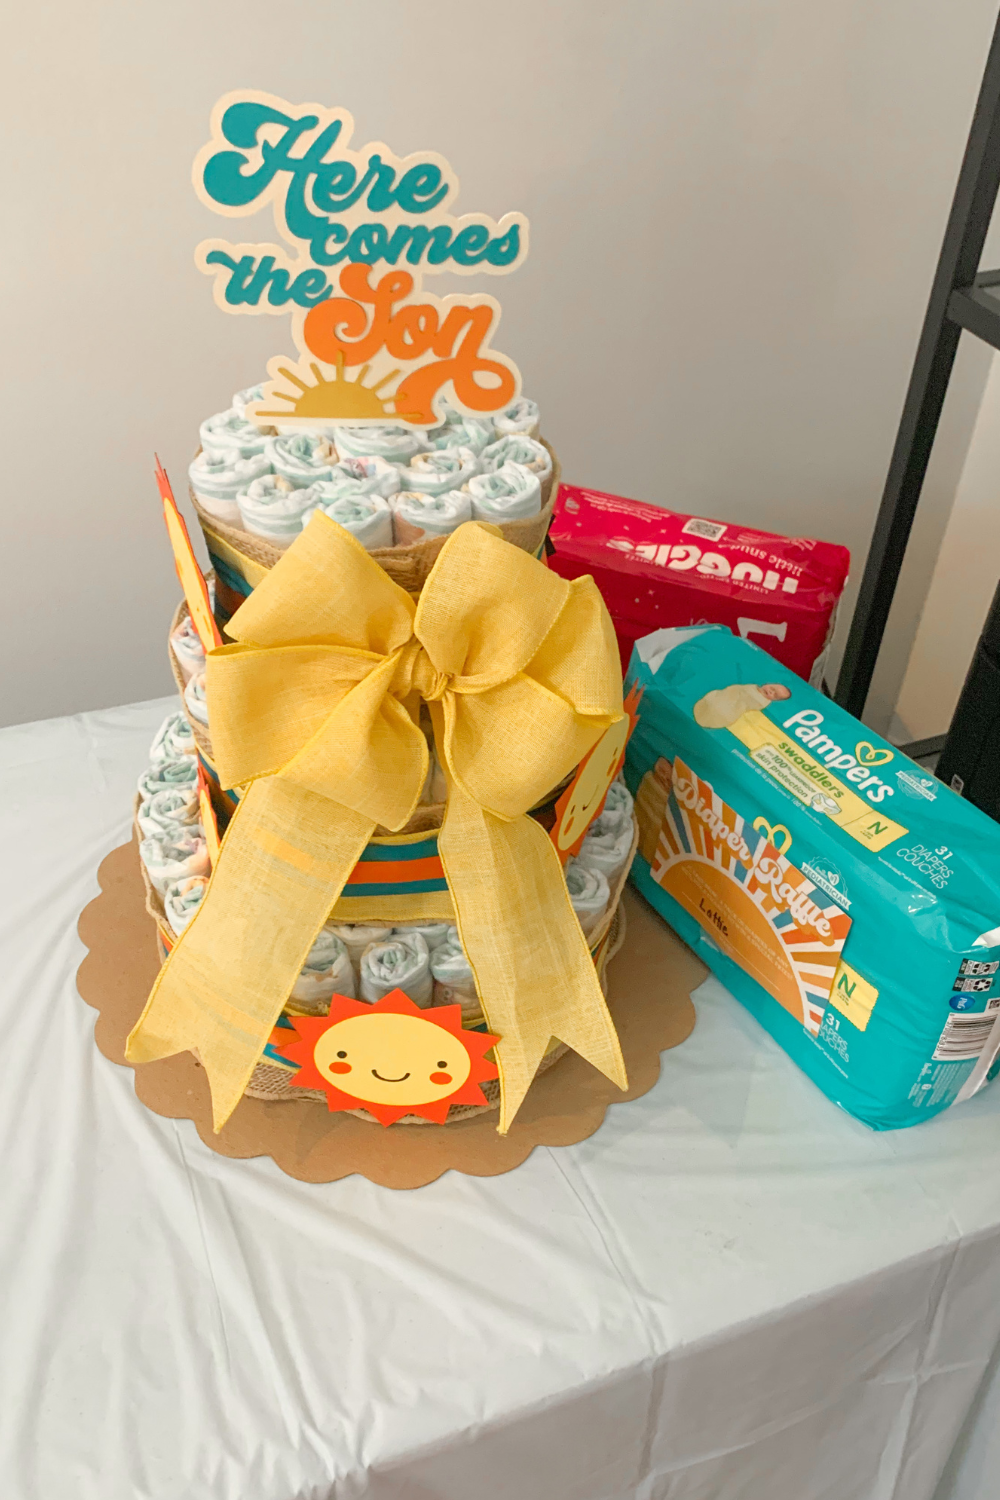 Here comes the sun baby shower cake